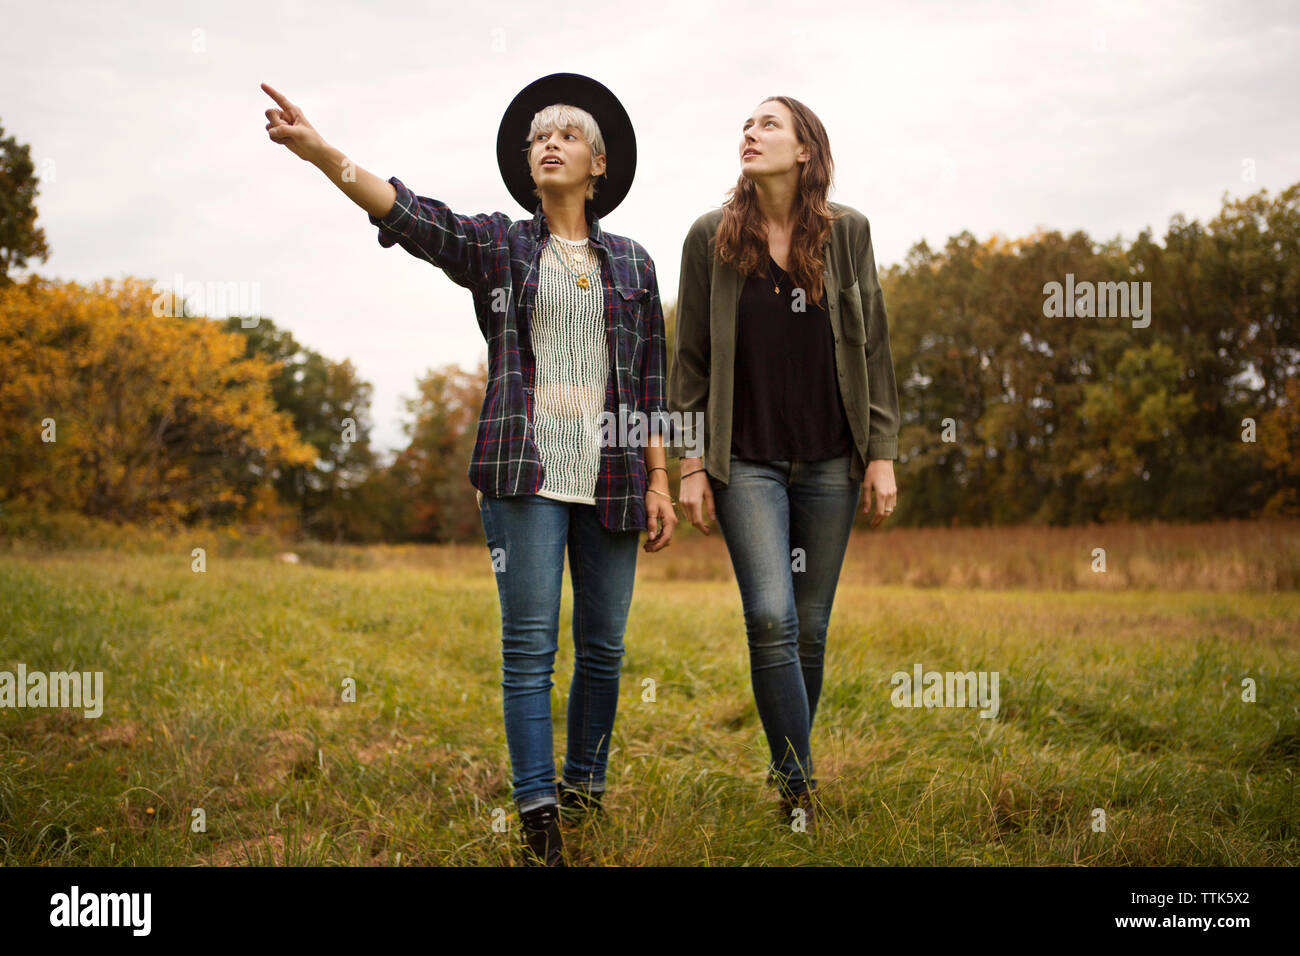 Young woman pointing and showing friend while walking on field Stock Photo